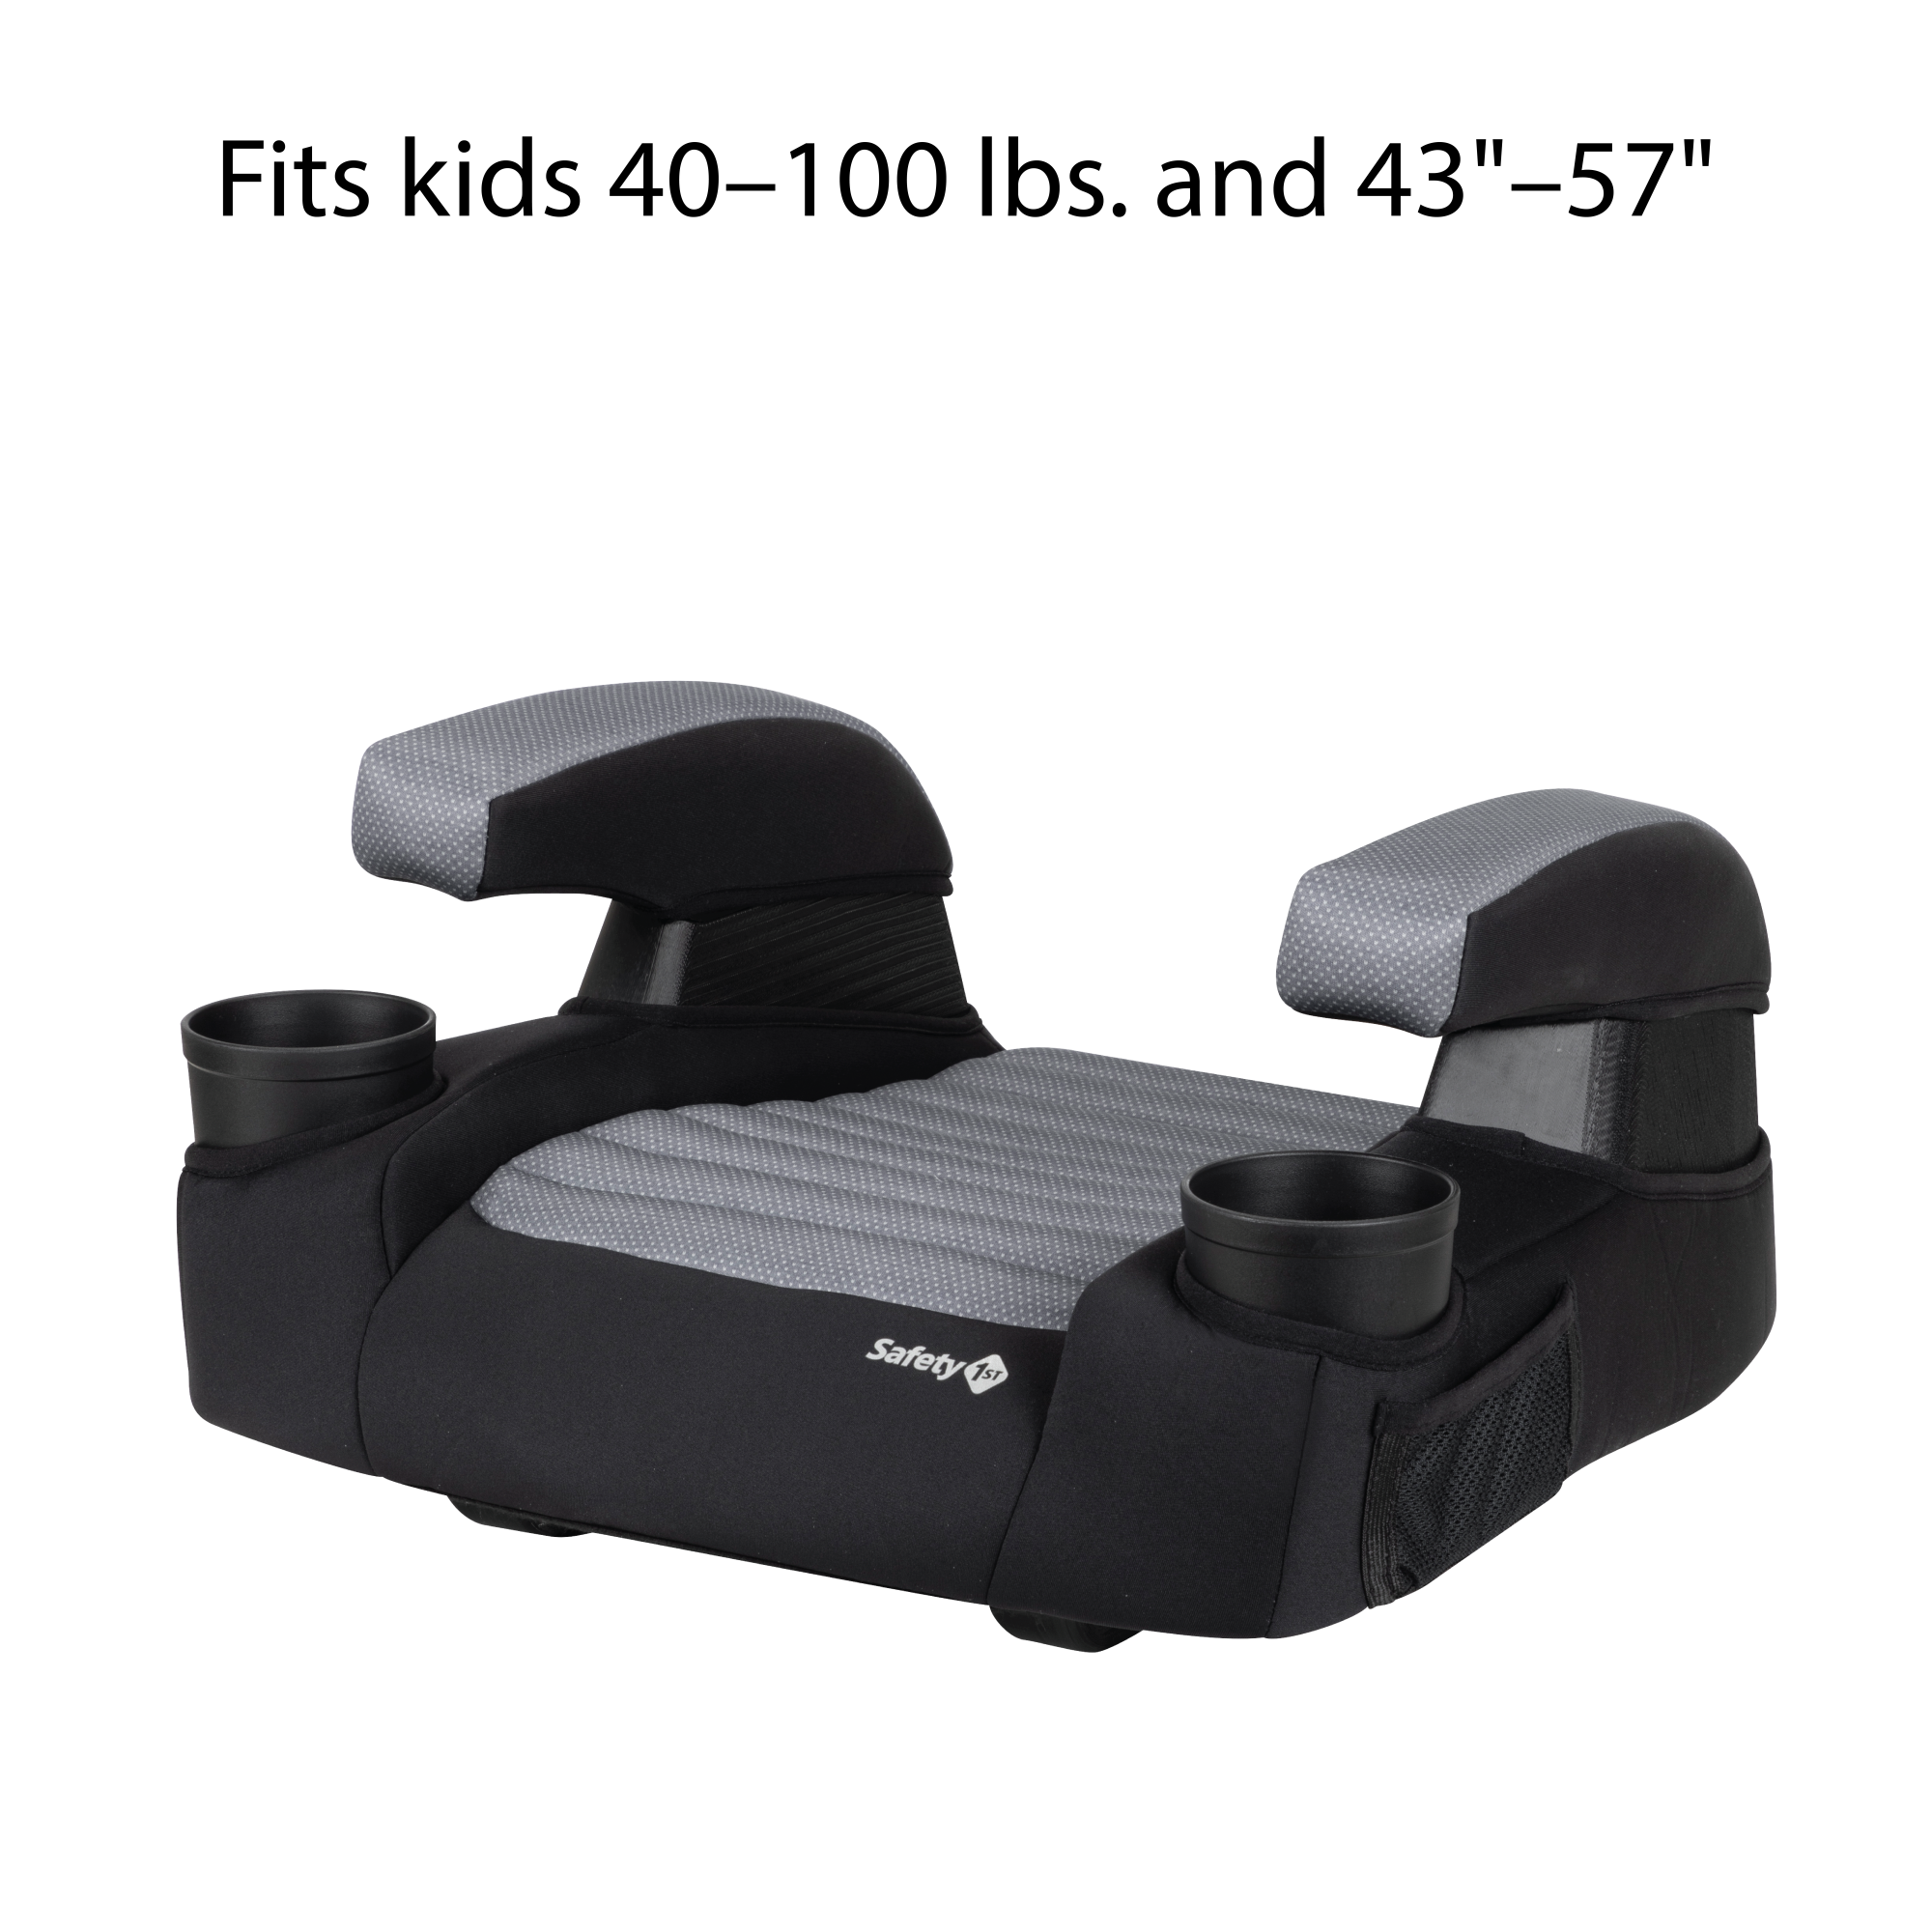 Boost-and-Go™ Lite Backless Booster - fits kids 40-100 lbs. and 43"-57"